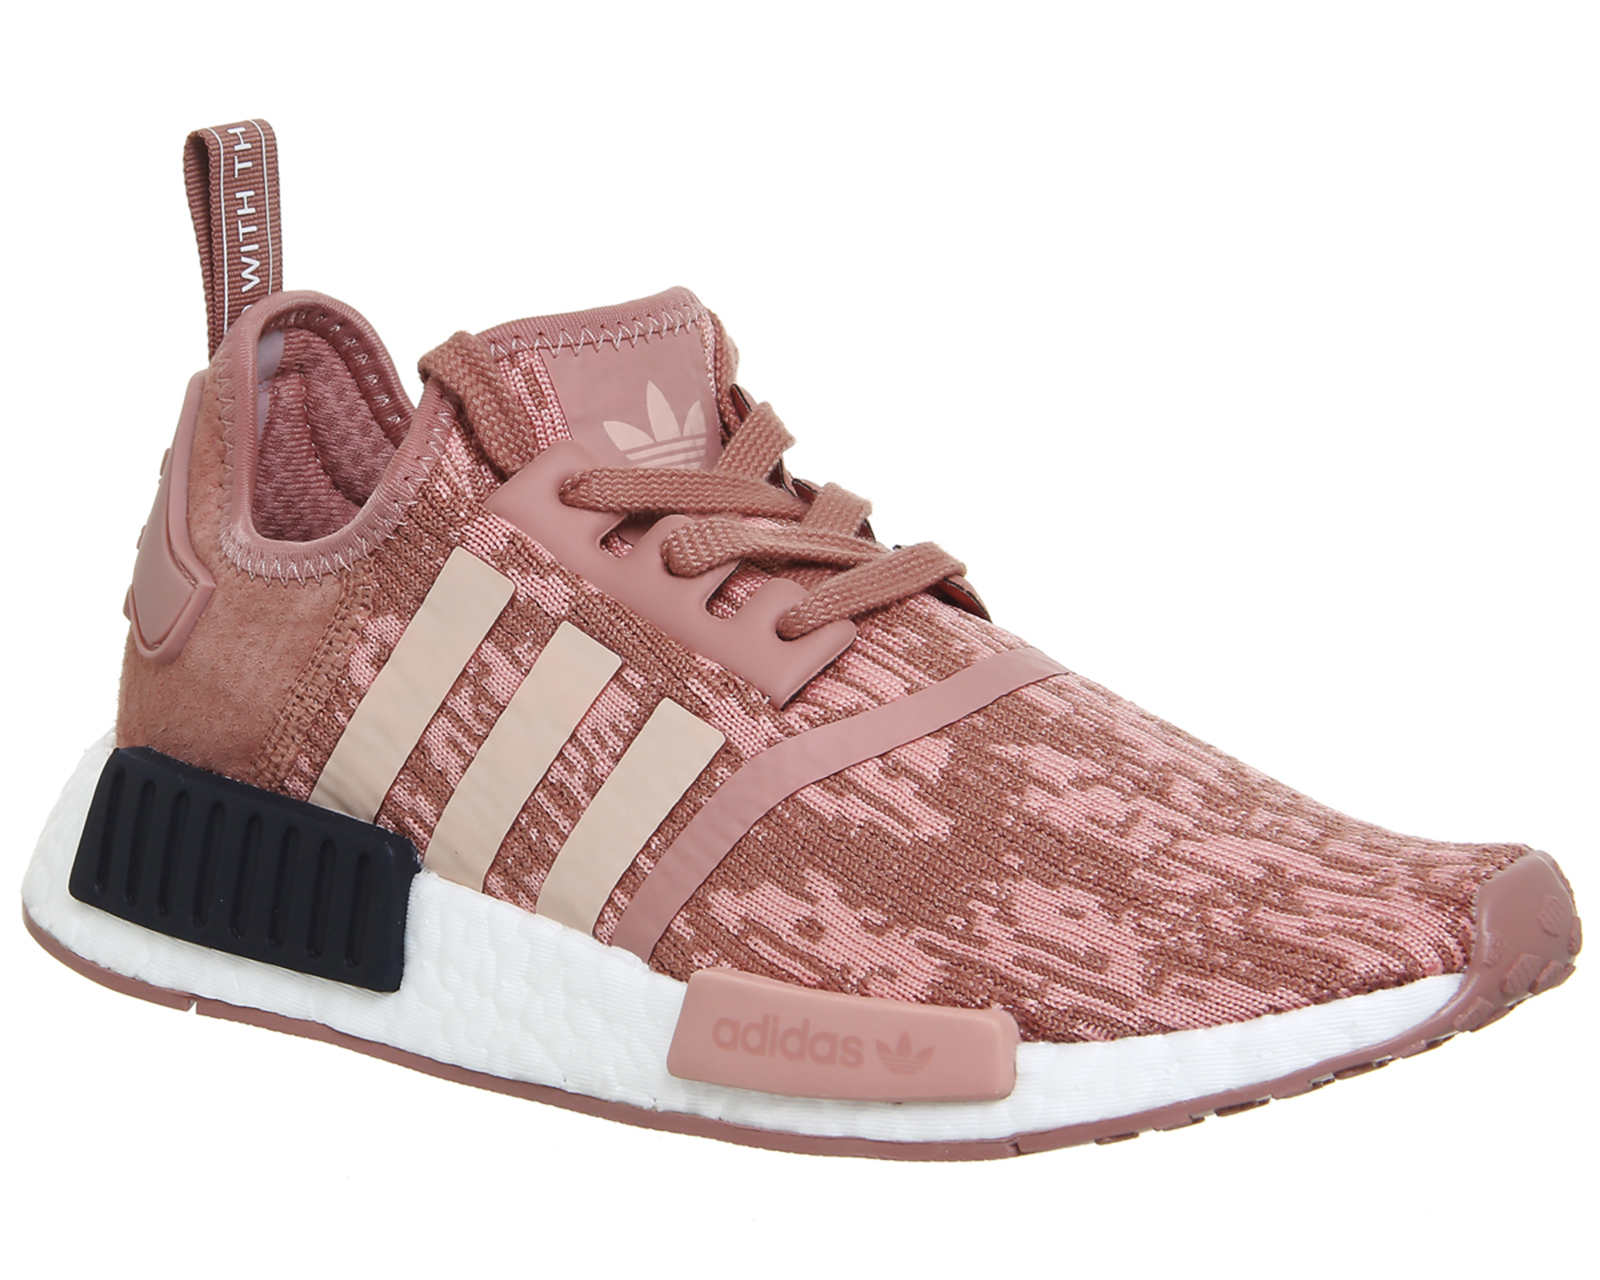 adidas Nmd R1 Raw Pink Trace Pink Ink 